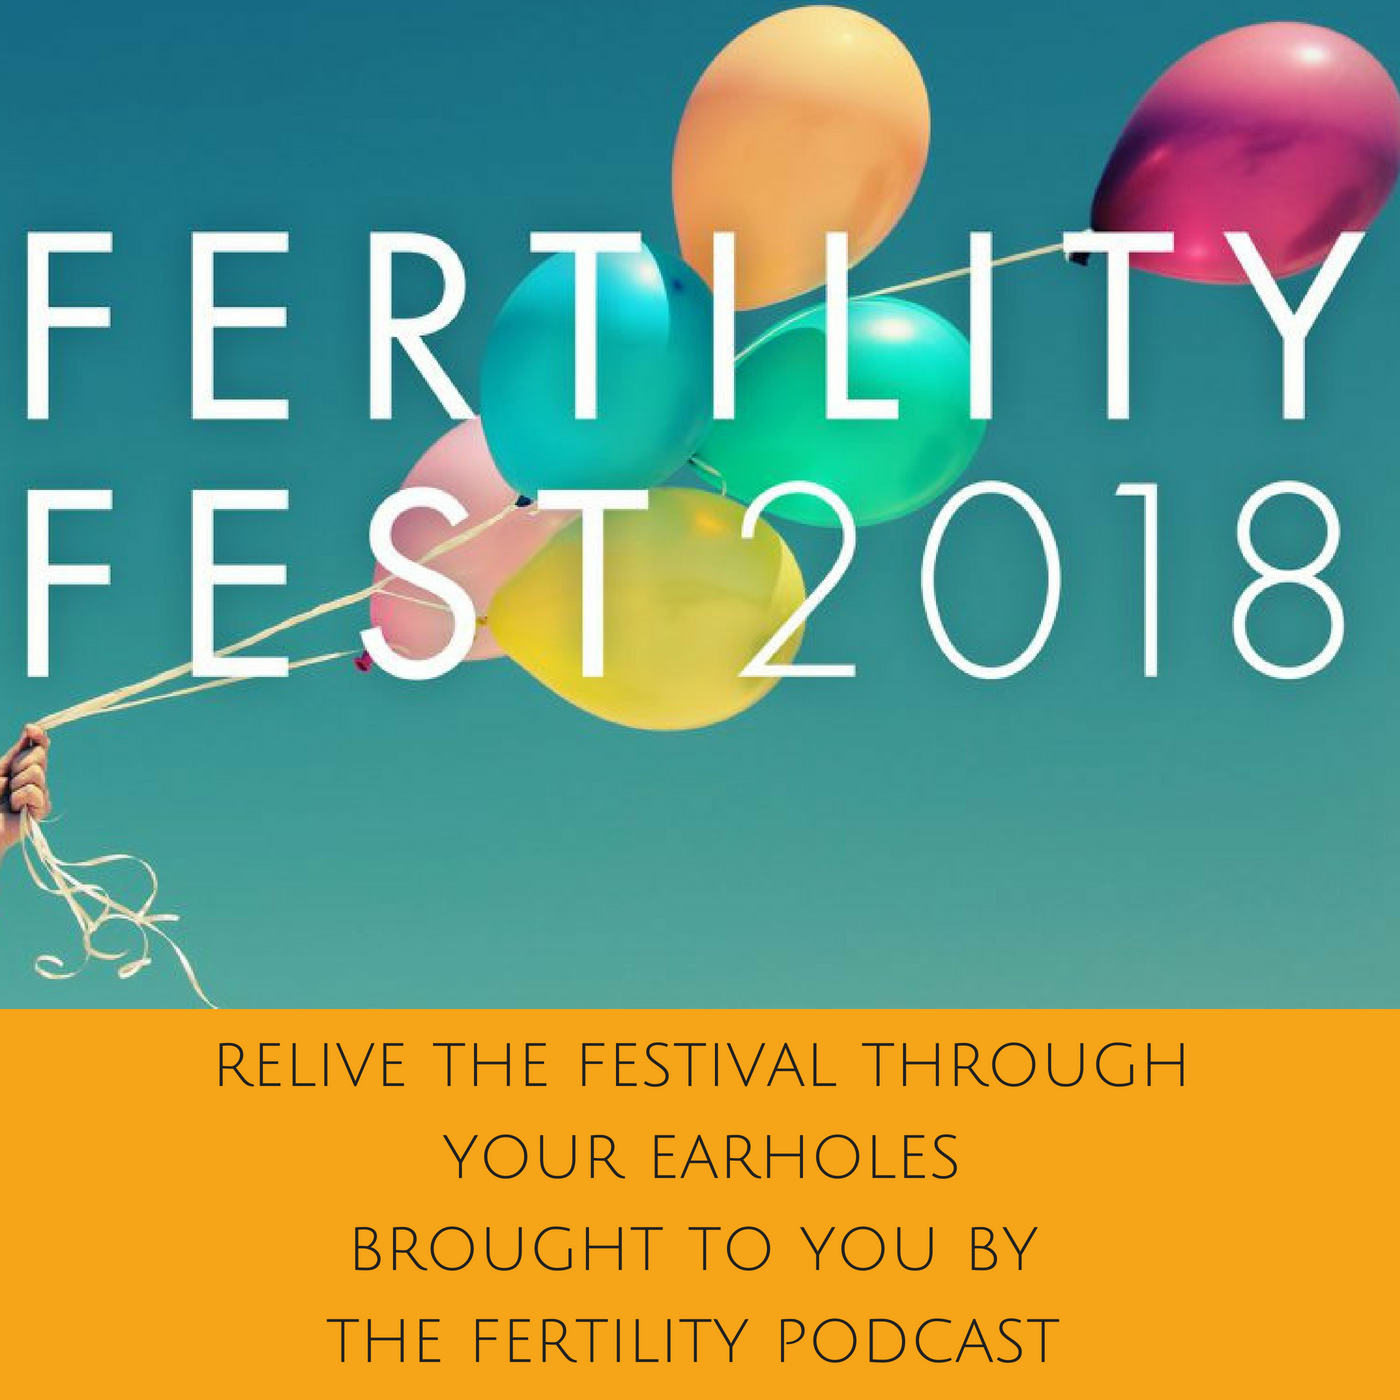 BONUS EPISODE: FERTILITY FEST 2018 What comes first the career of the egg